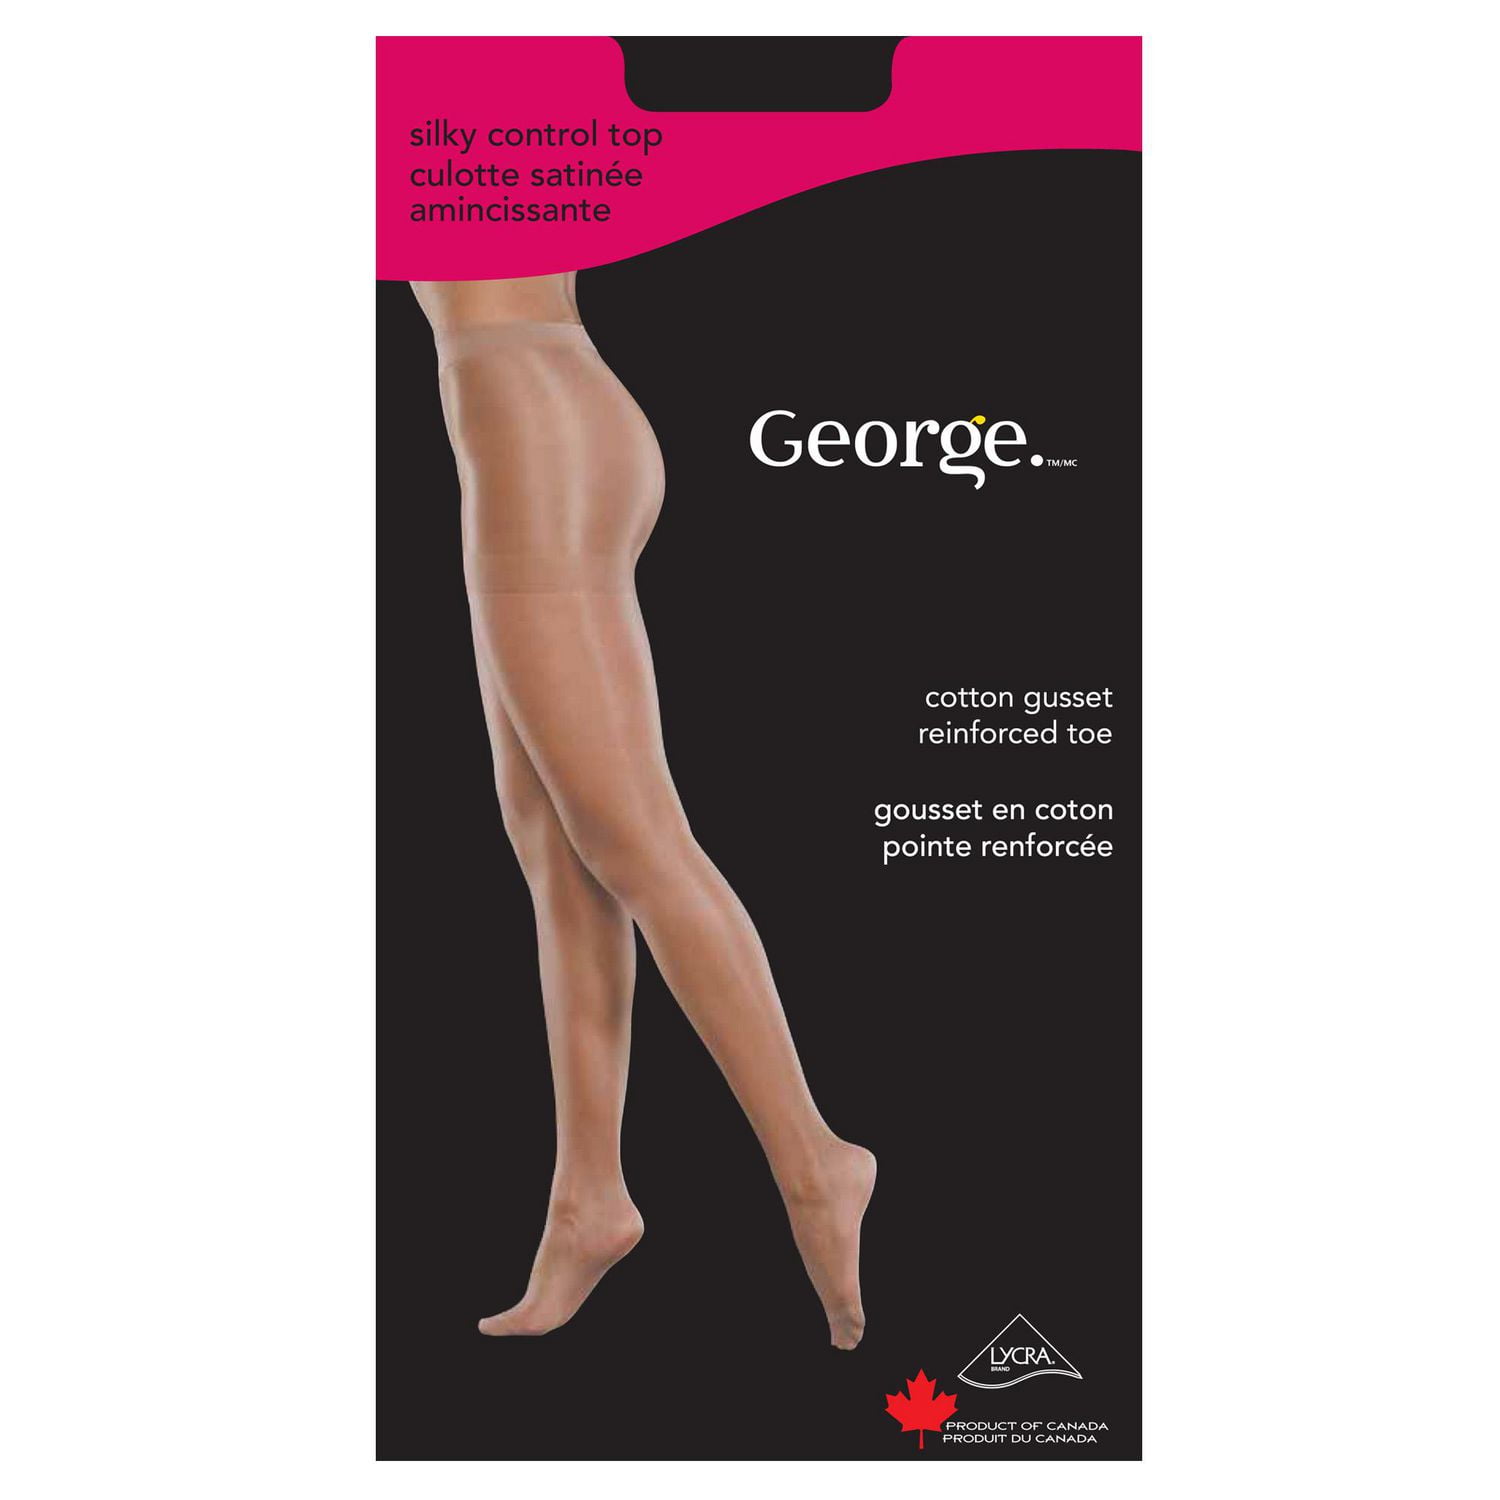 George Women's' Silky Control Top Pantyhose